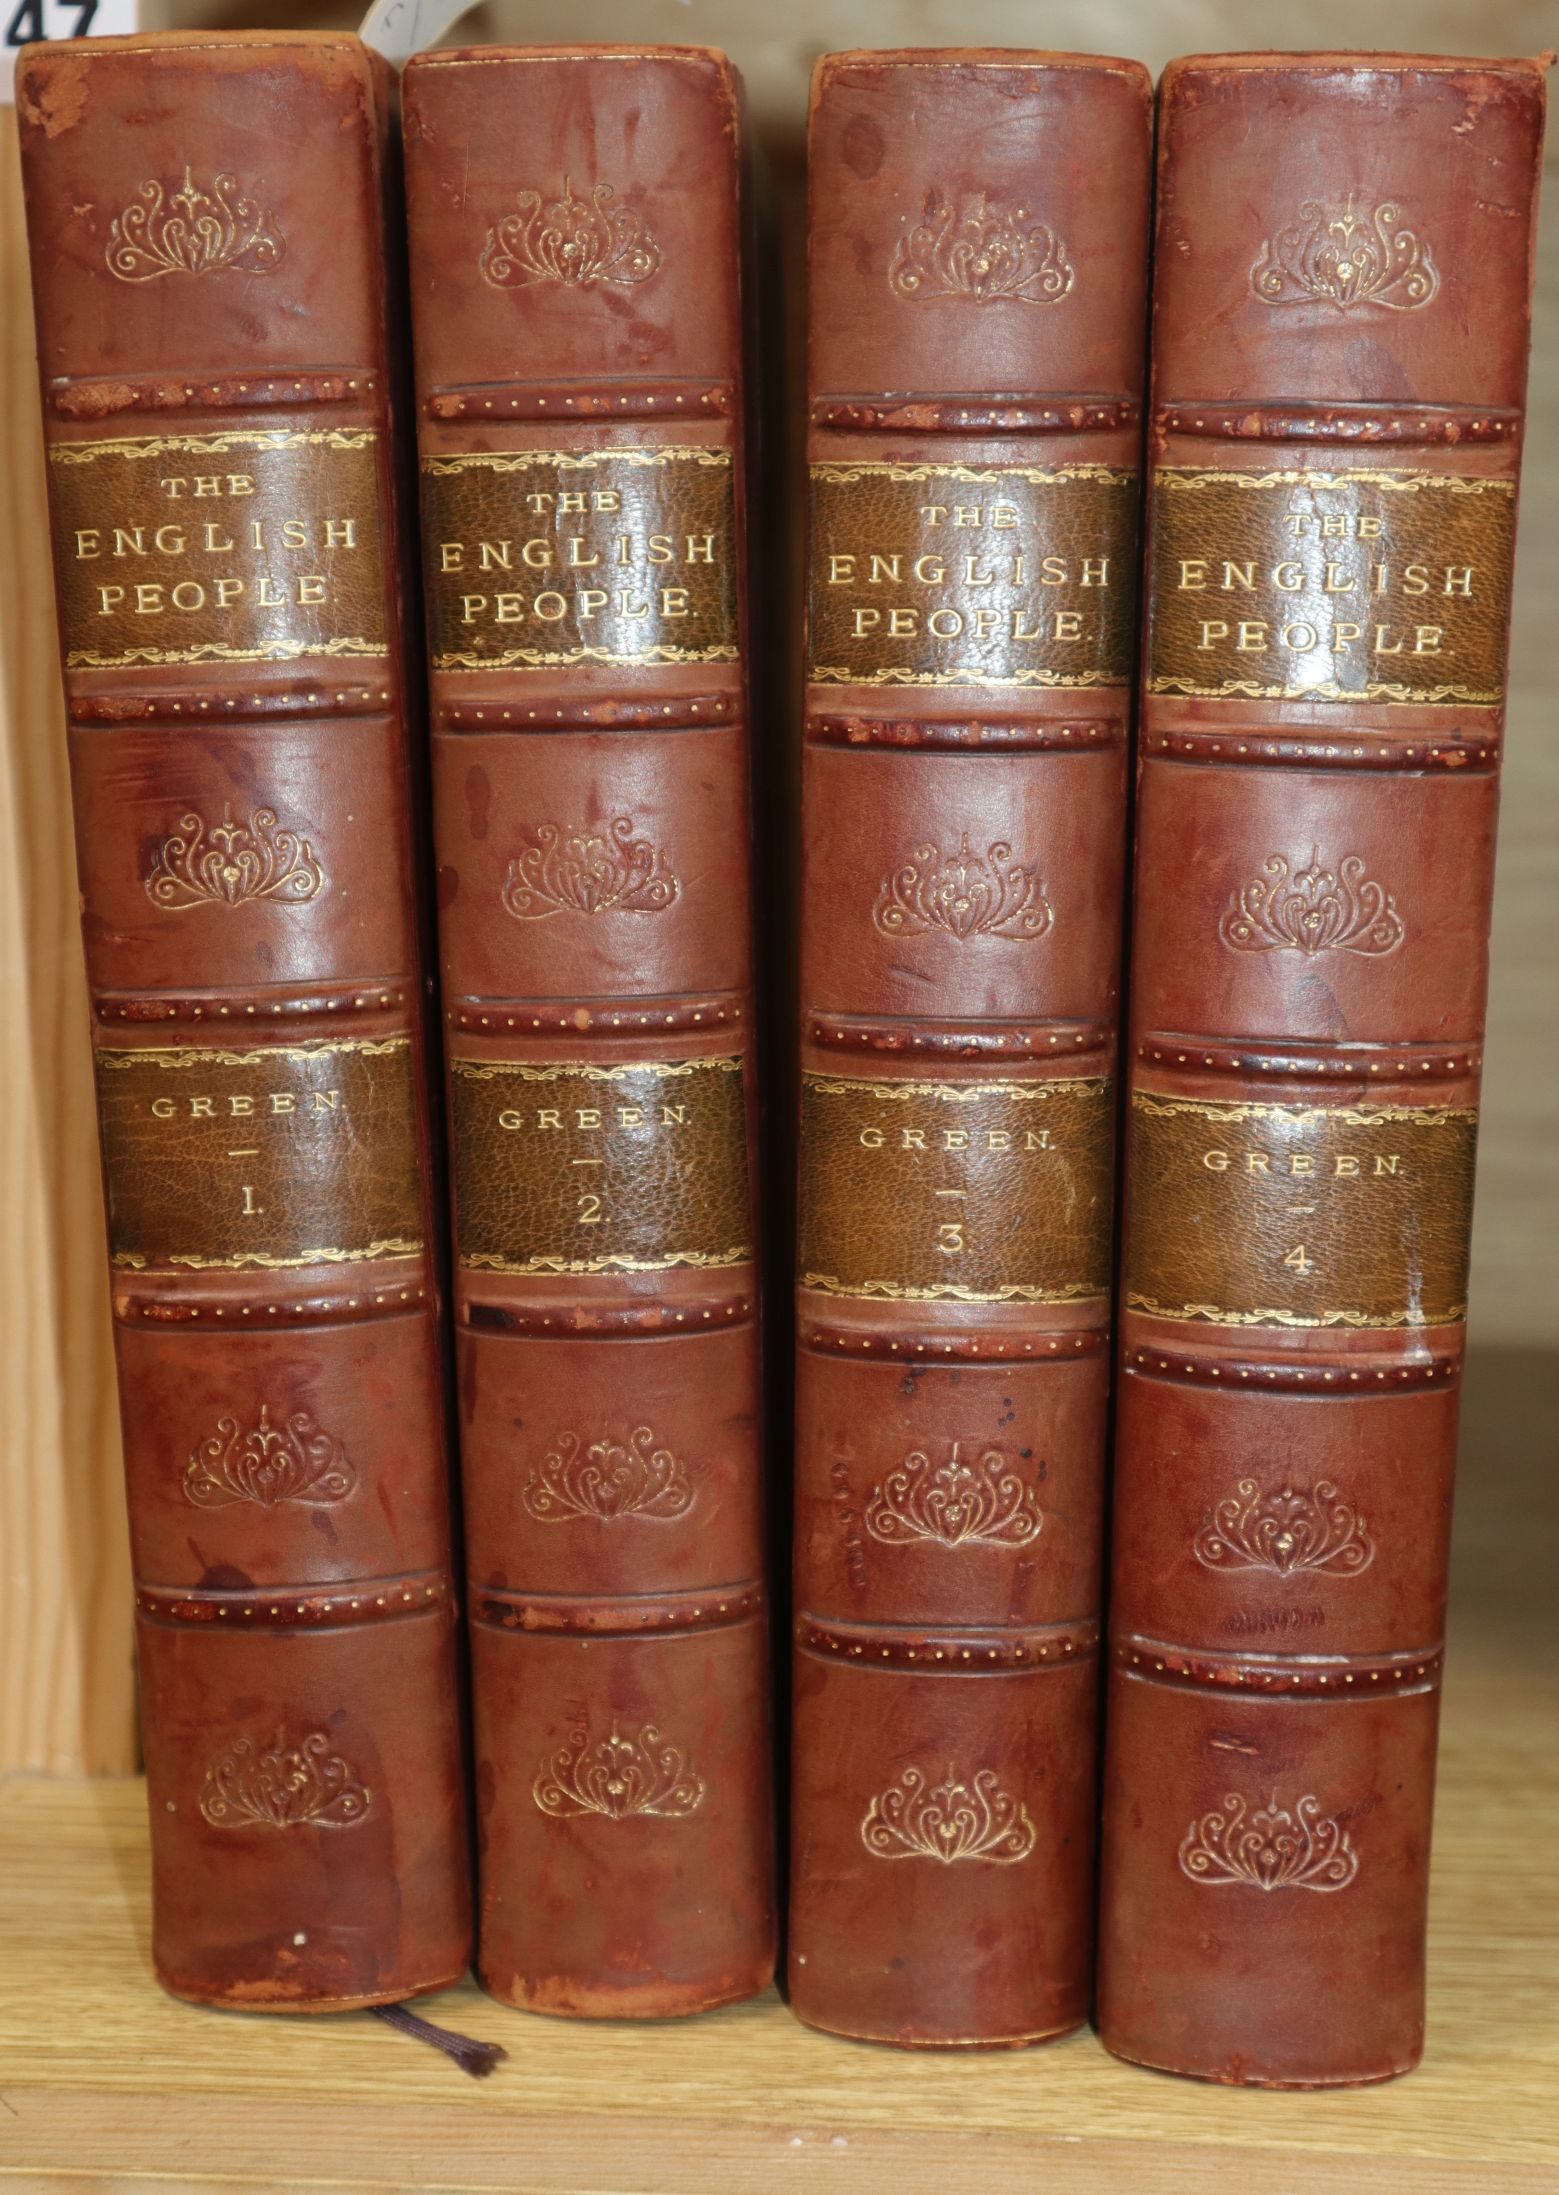 Green, J.R. - A Short History of the English People, vols 1 - 4, Macmillan and Co., 1892